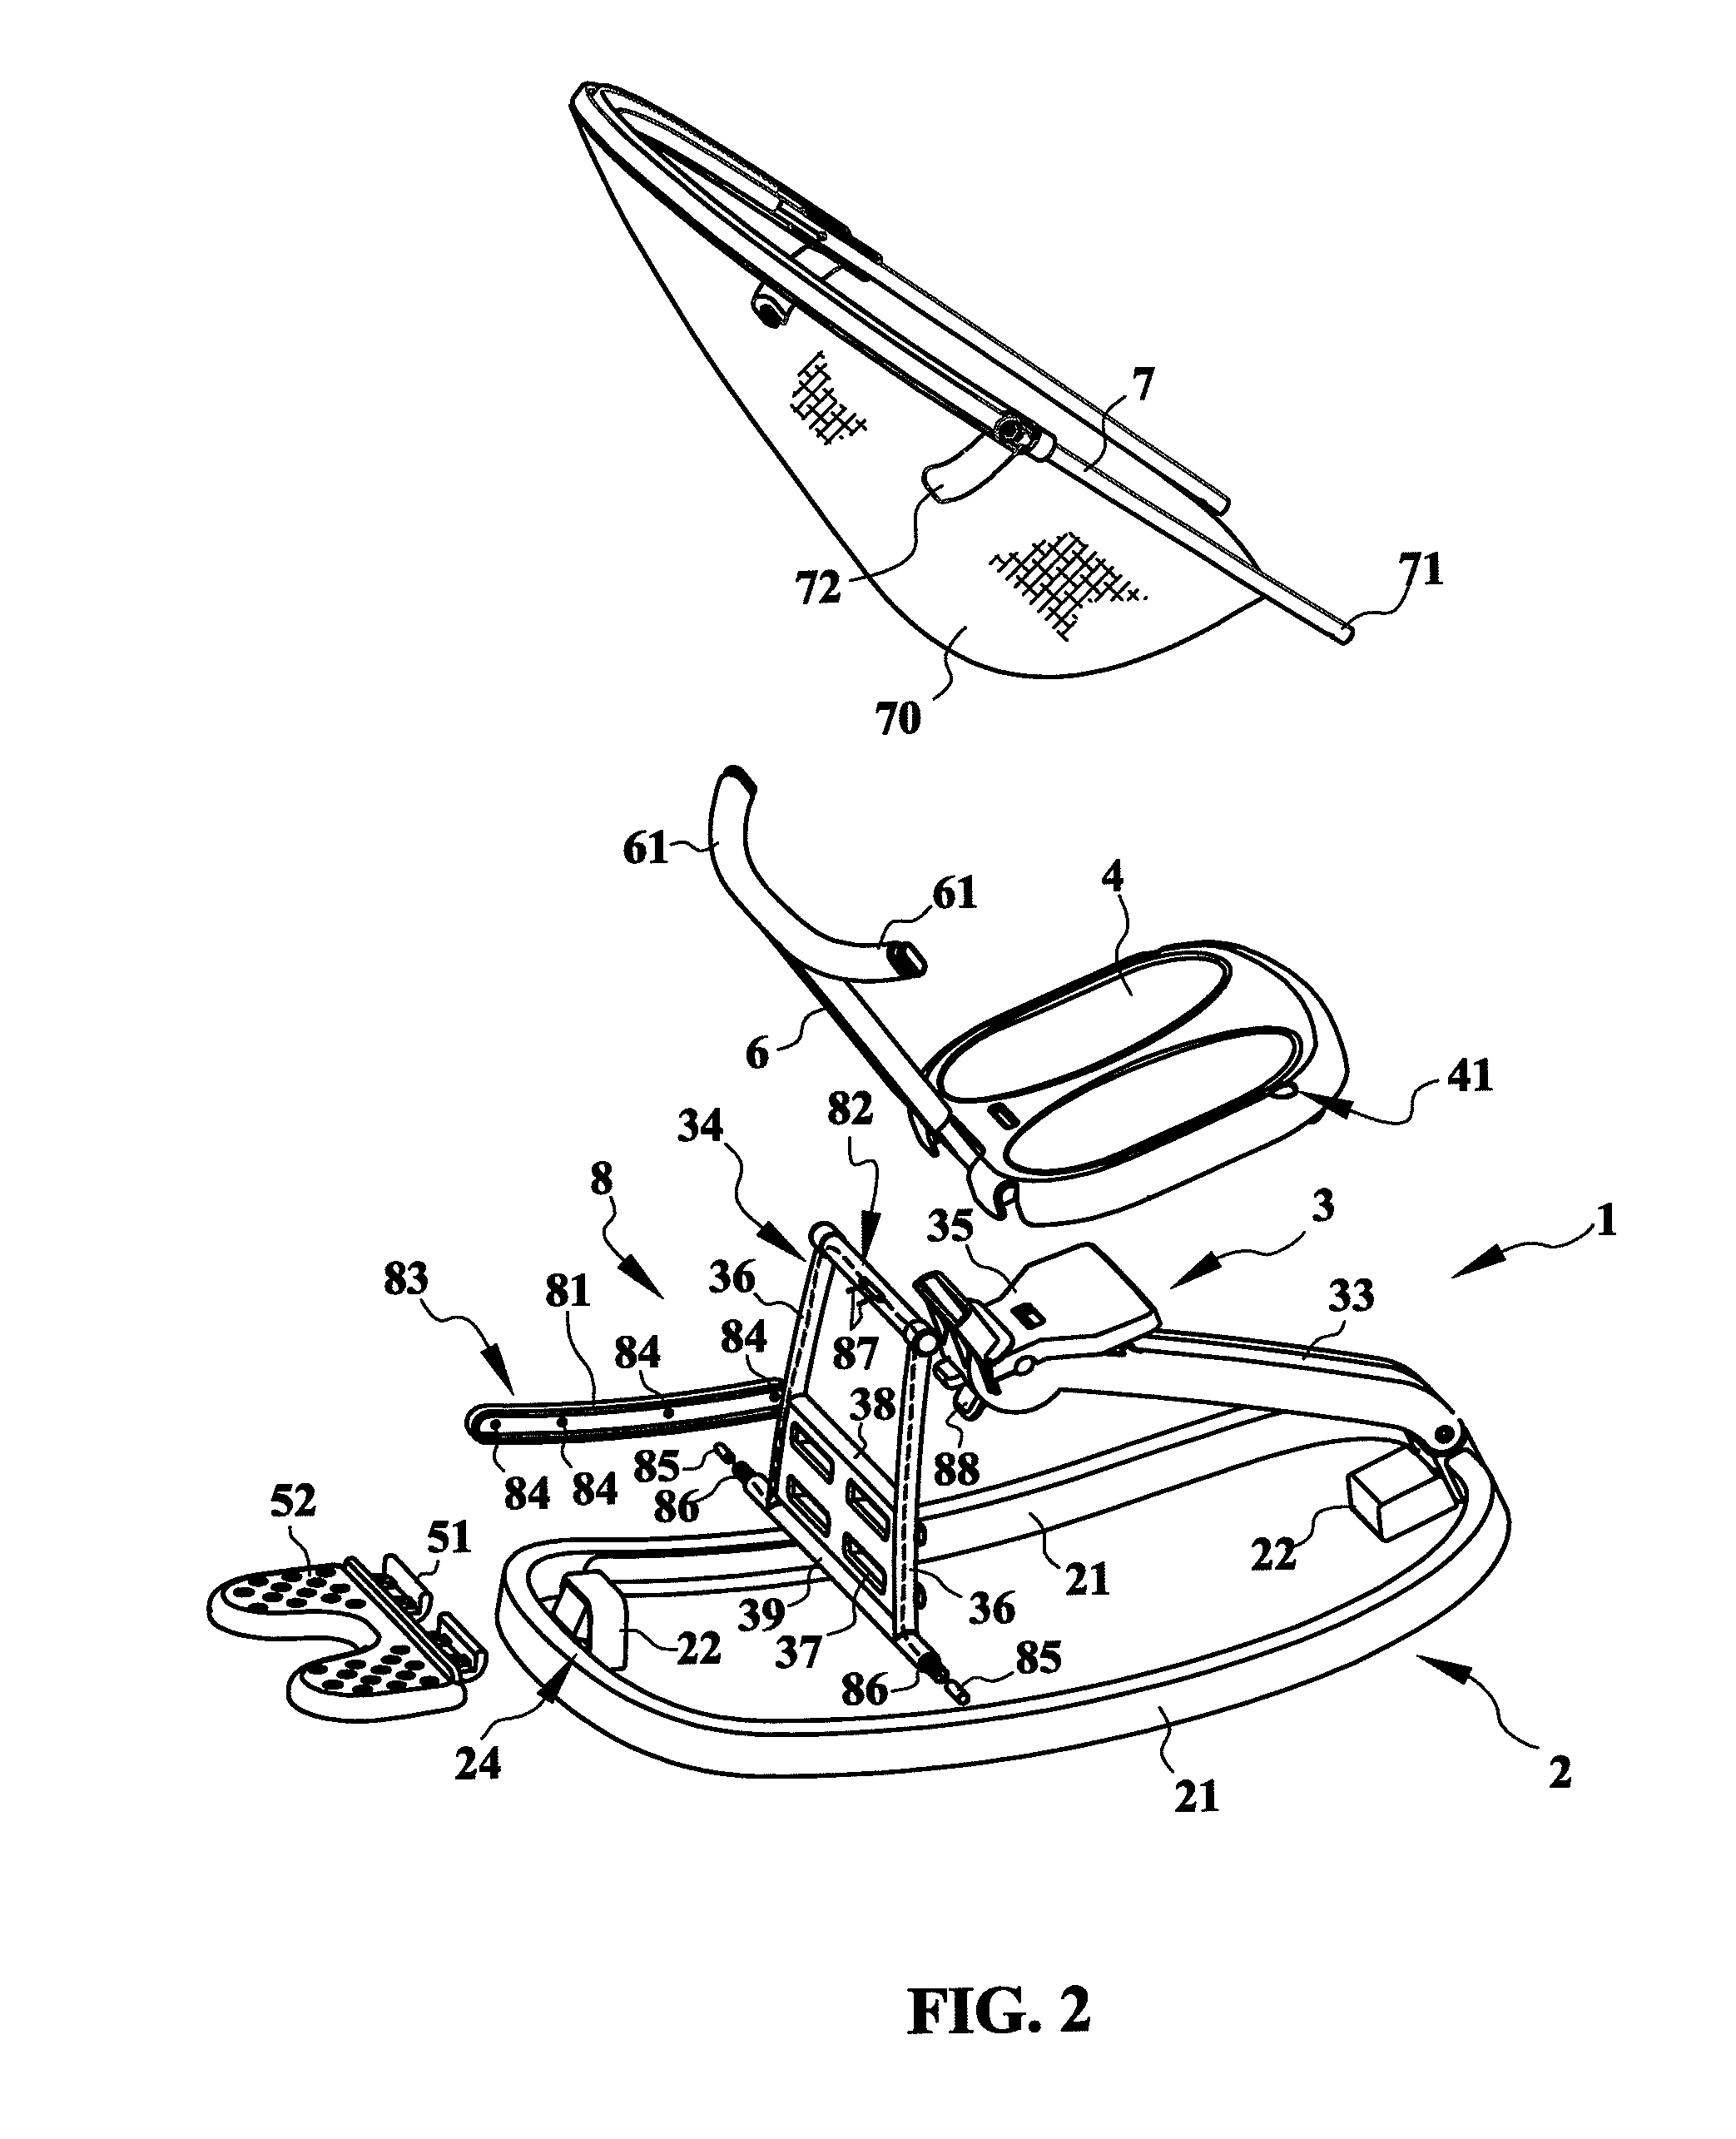 Convertible rocking chair with multi-using modes